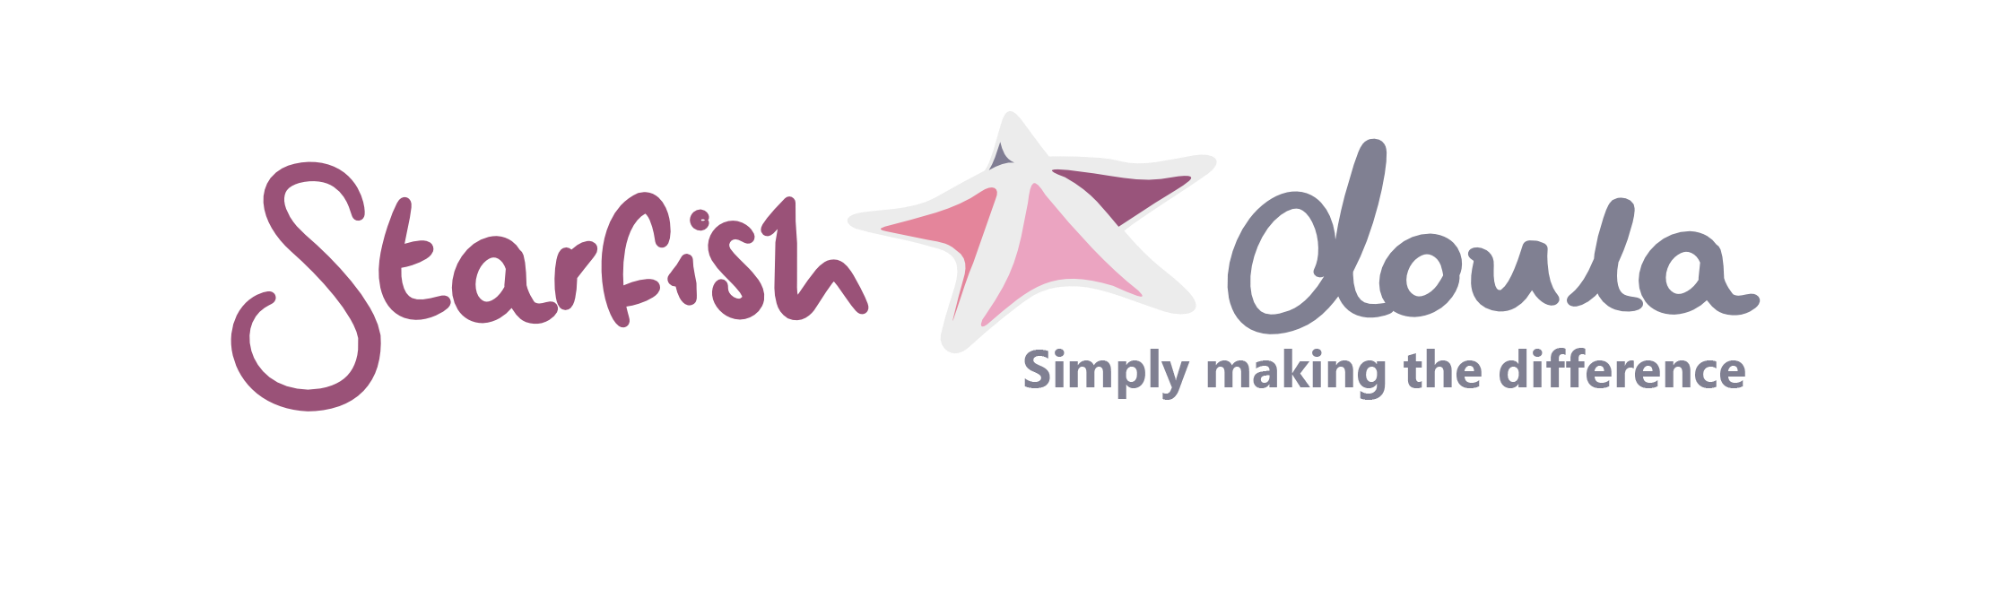 Starfish doula logo, with the tagline "simply making the difference"